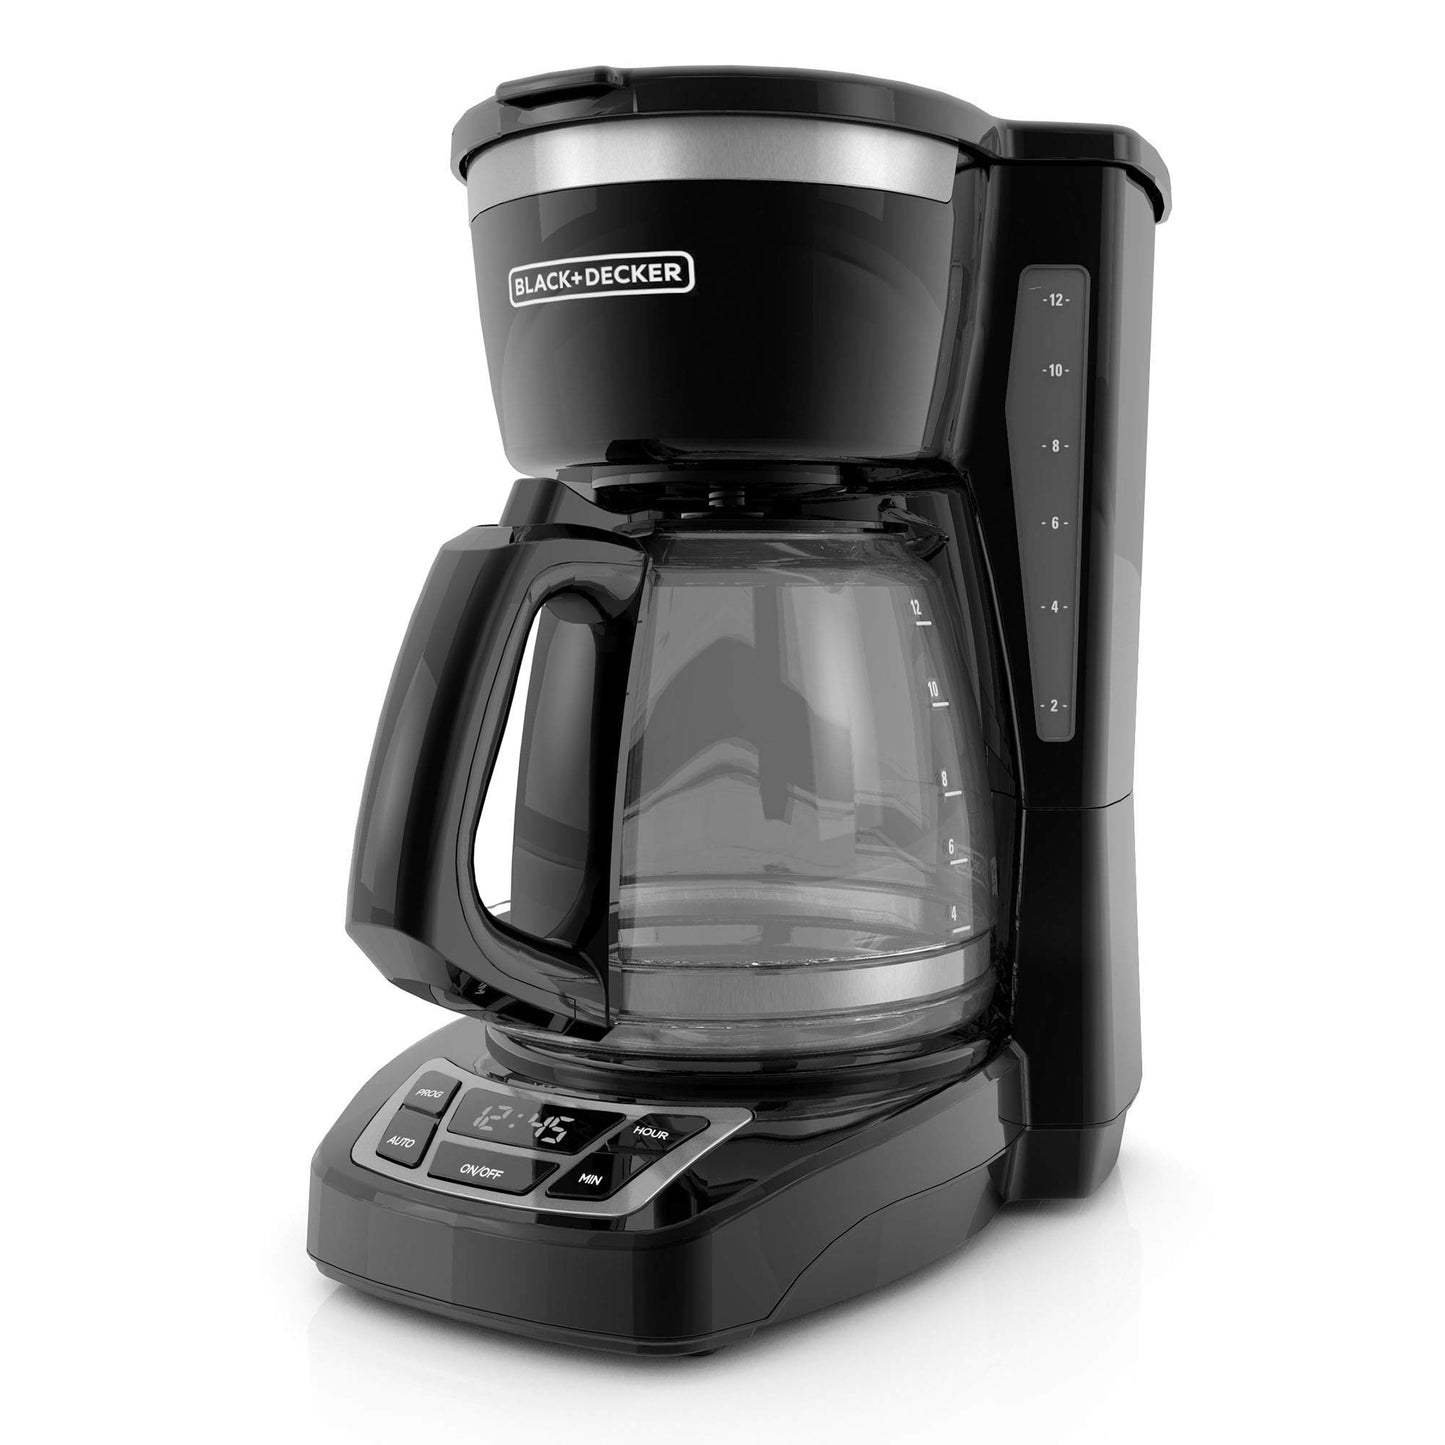 12-Cup Programmable Coffee Maker, Black/Stainless Steel